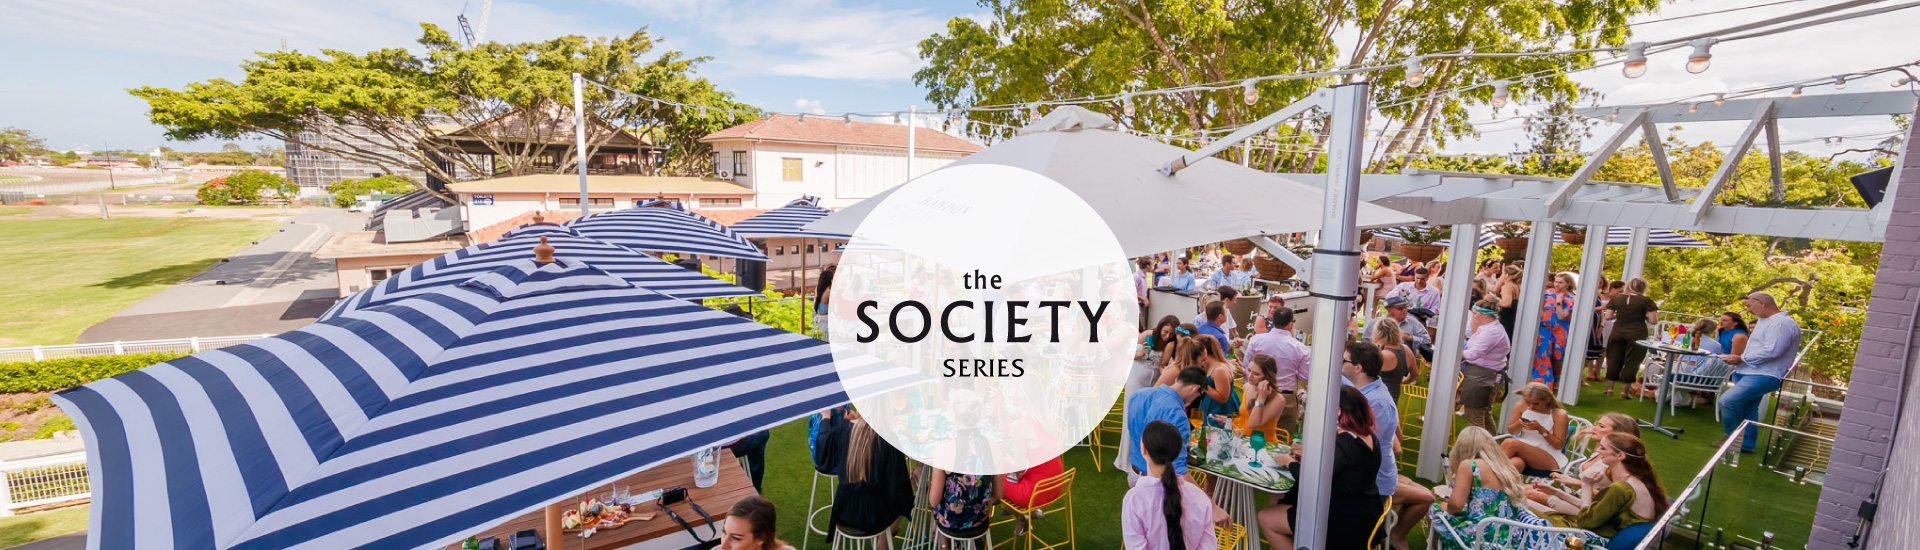 Rooftop Bar - The Society Series